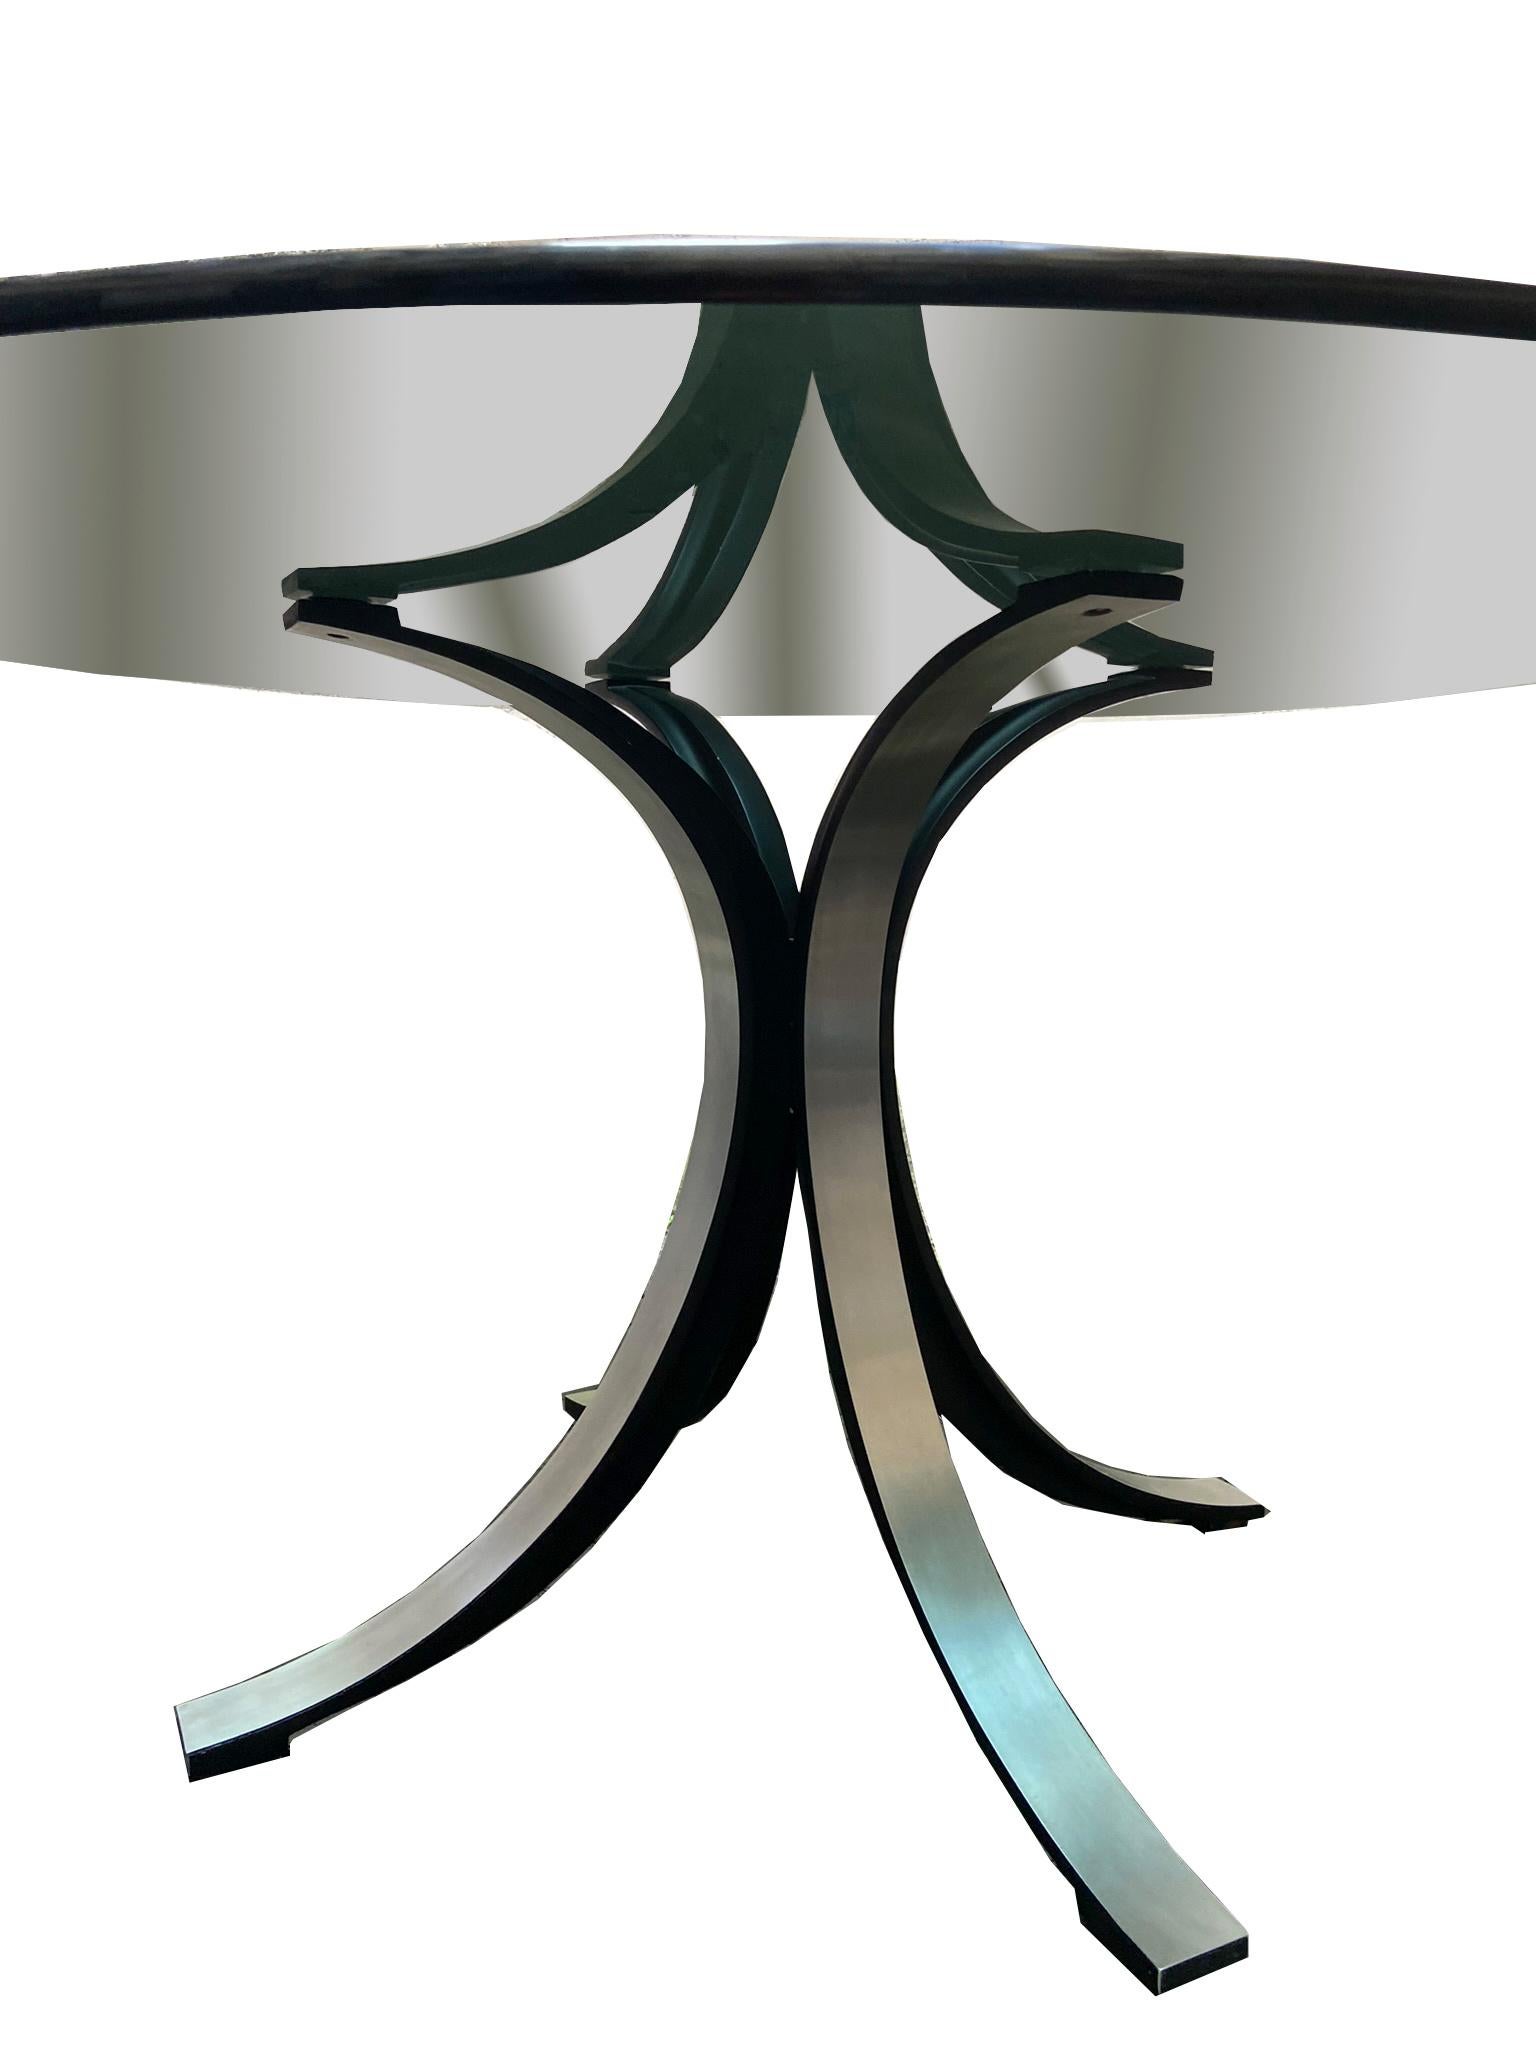 T69 round dining table, designed by Osvaldo Borsani and Eugenio Gerli in the 1960s and produced by TECNO. Characteristic feature of the table is the supporting structure built by the crossed joint of two equal metal elements with enameled internal